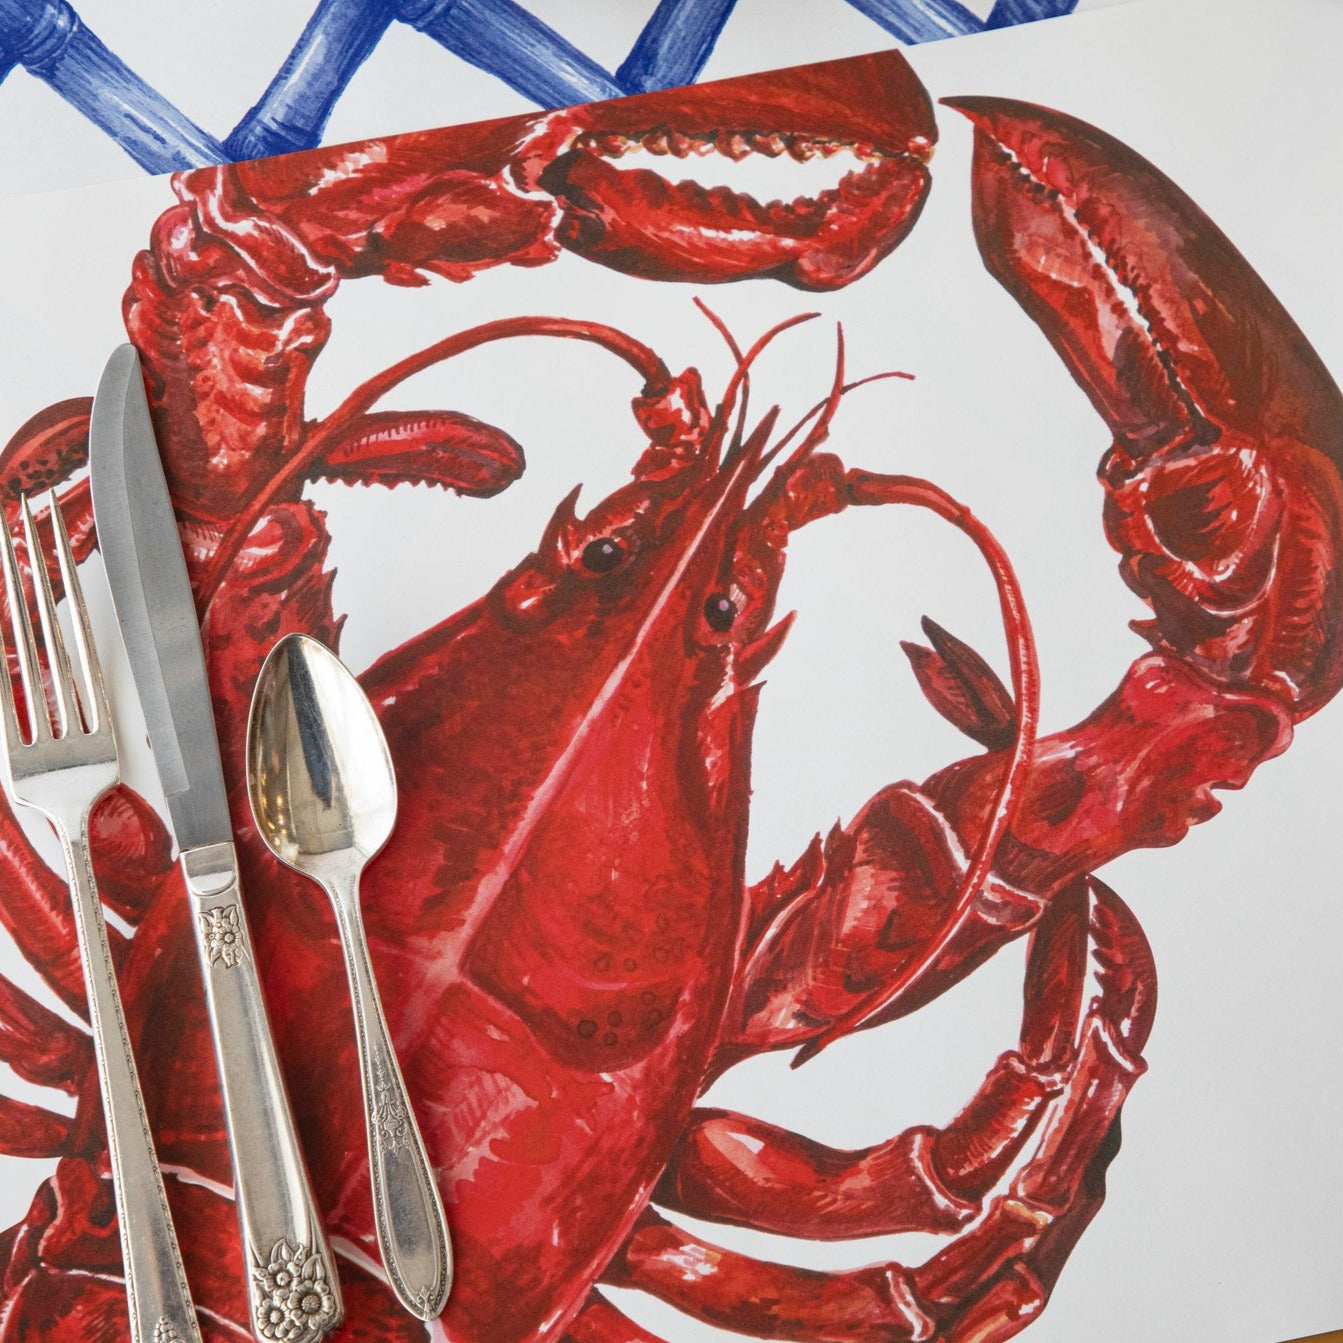 Close-up of the Maine Lobster Placemat in a place setting, showing the lobster art in detail.